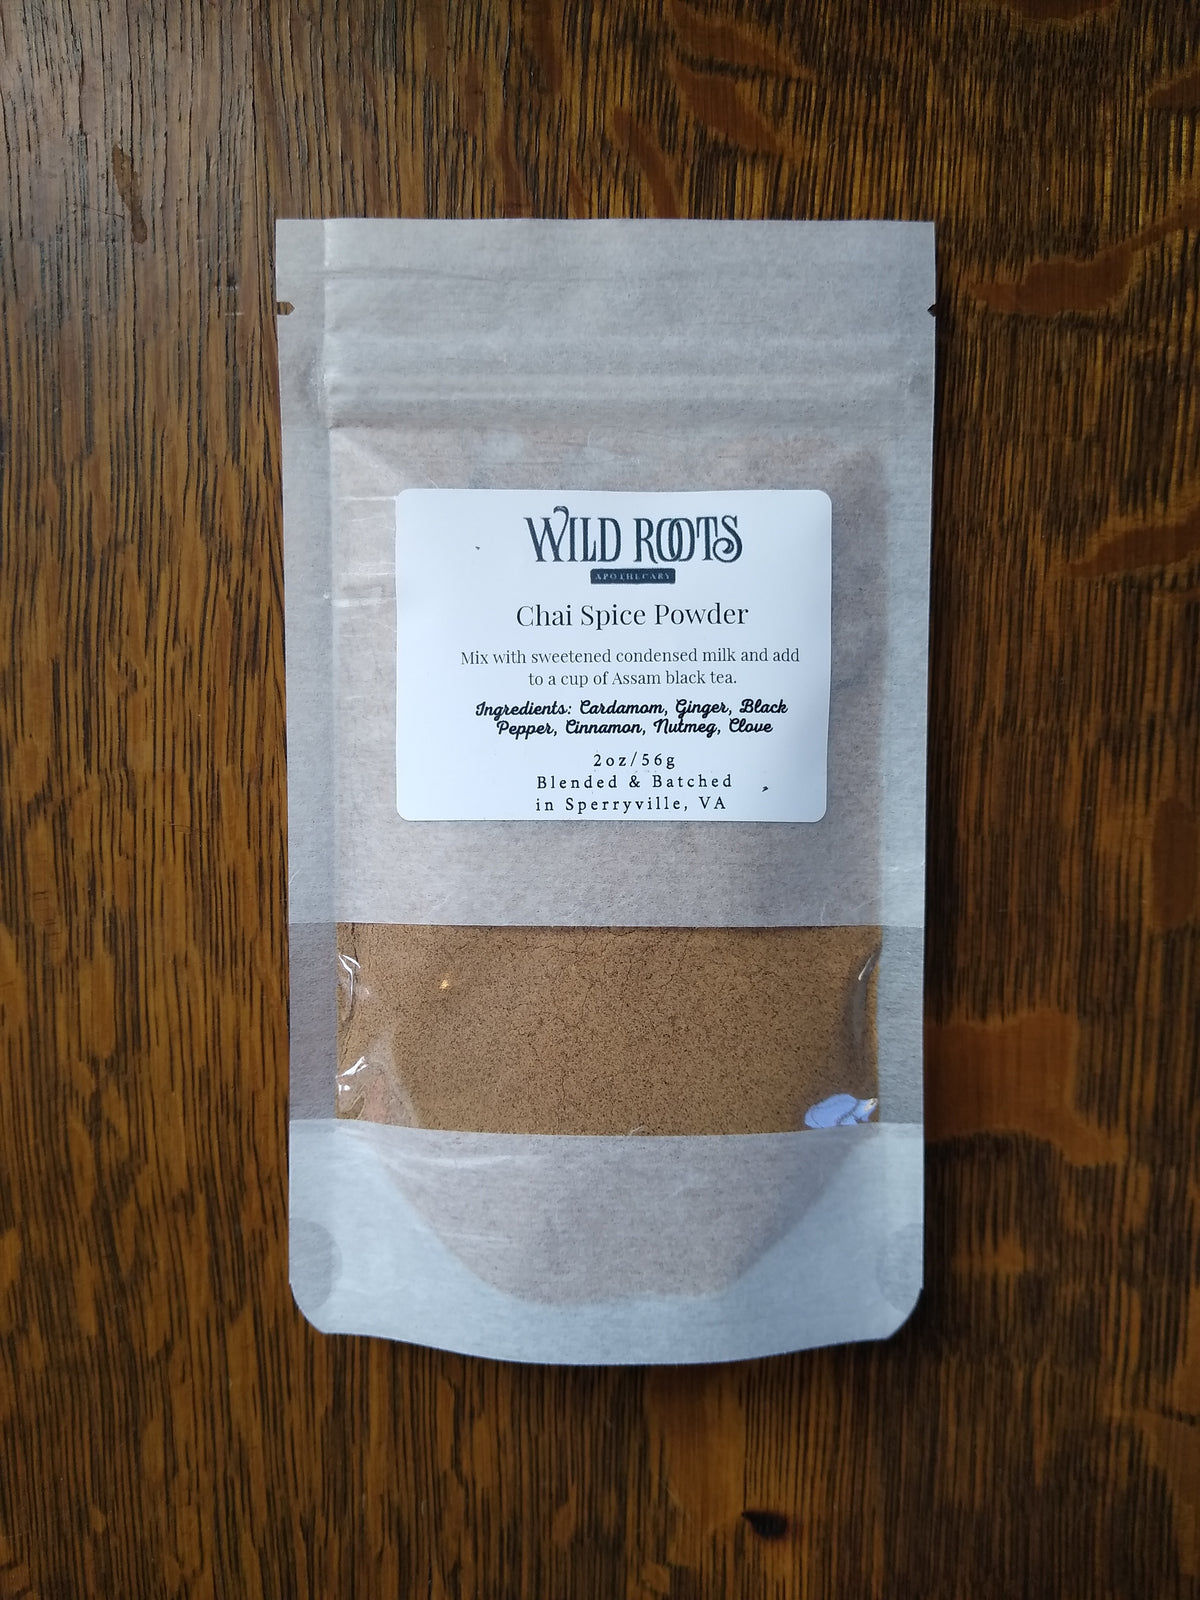 Chai Spice Powder—Wild Roots Apothecary